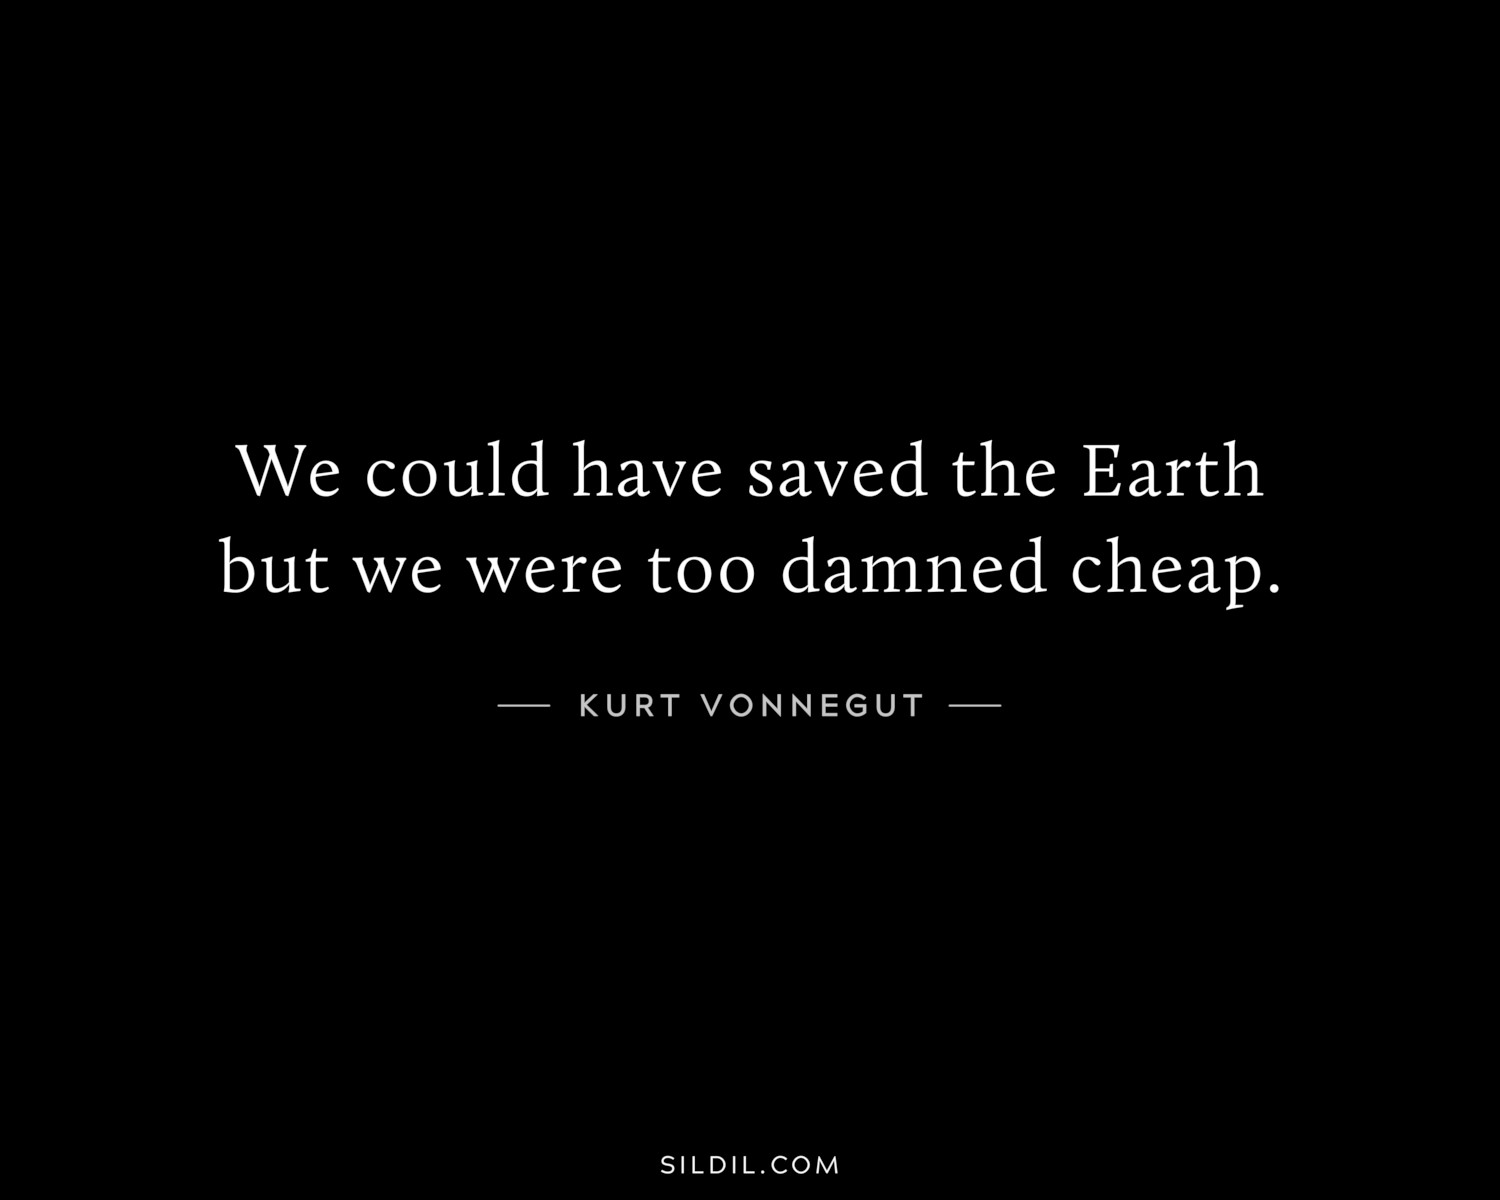 We could have saved the Earth but we were too damned cheap.